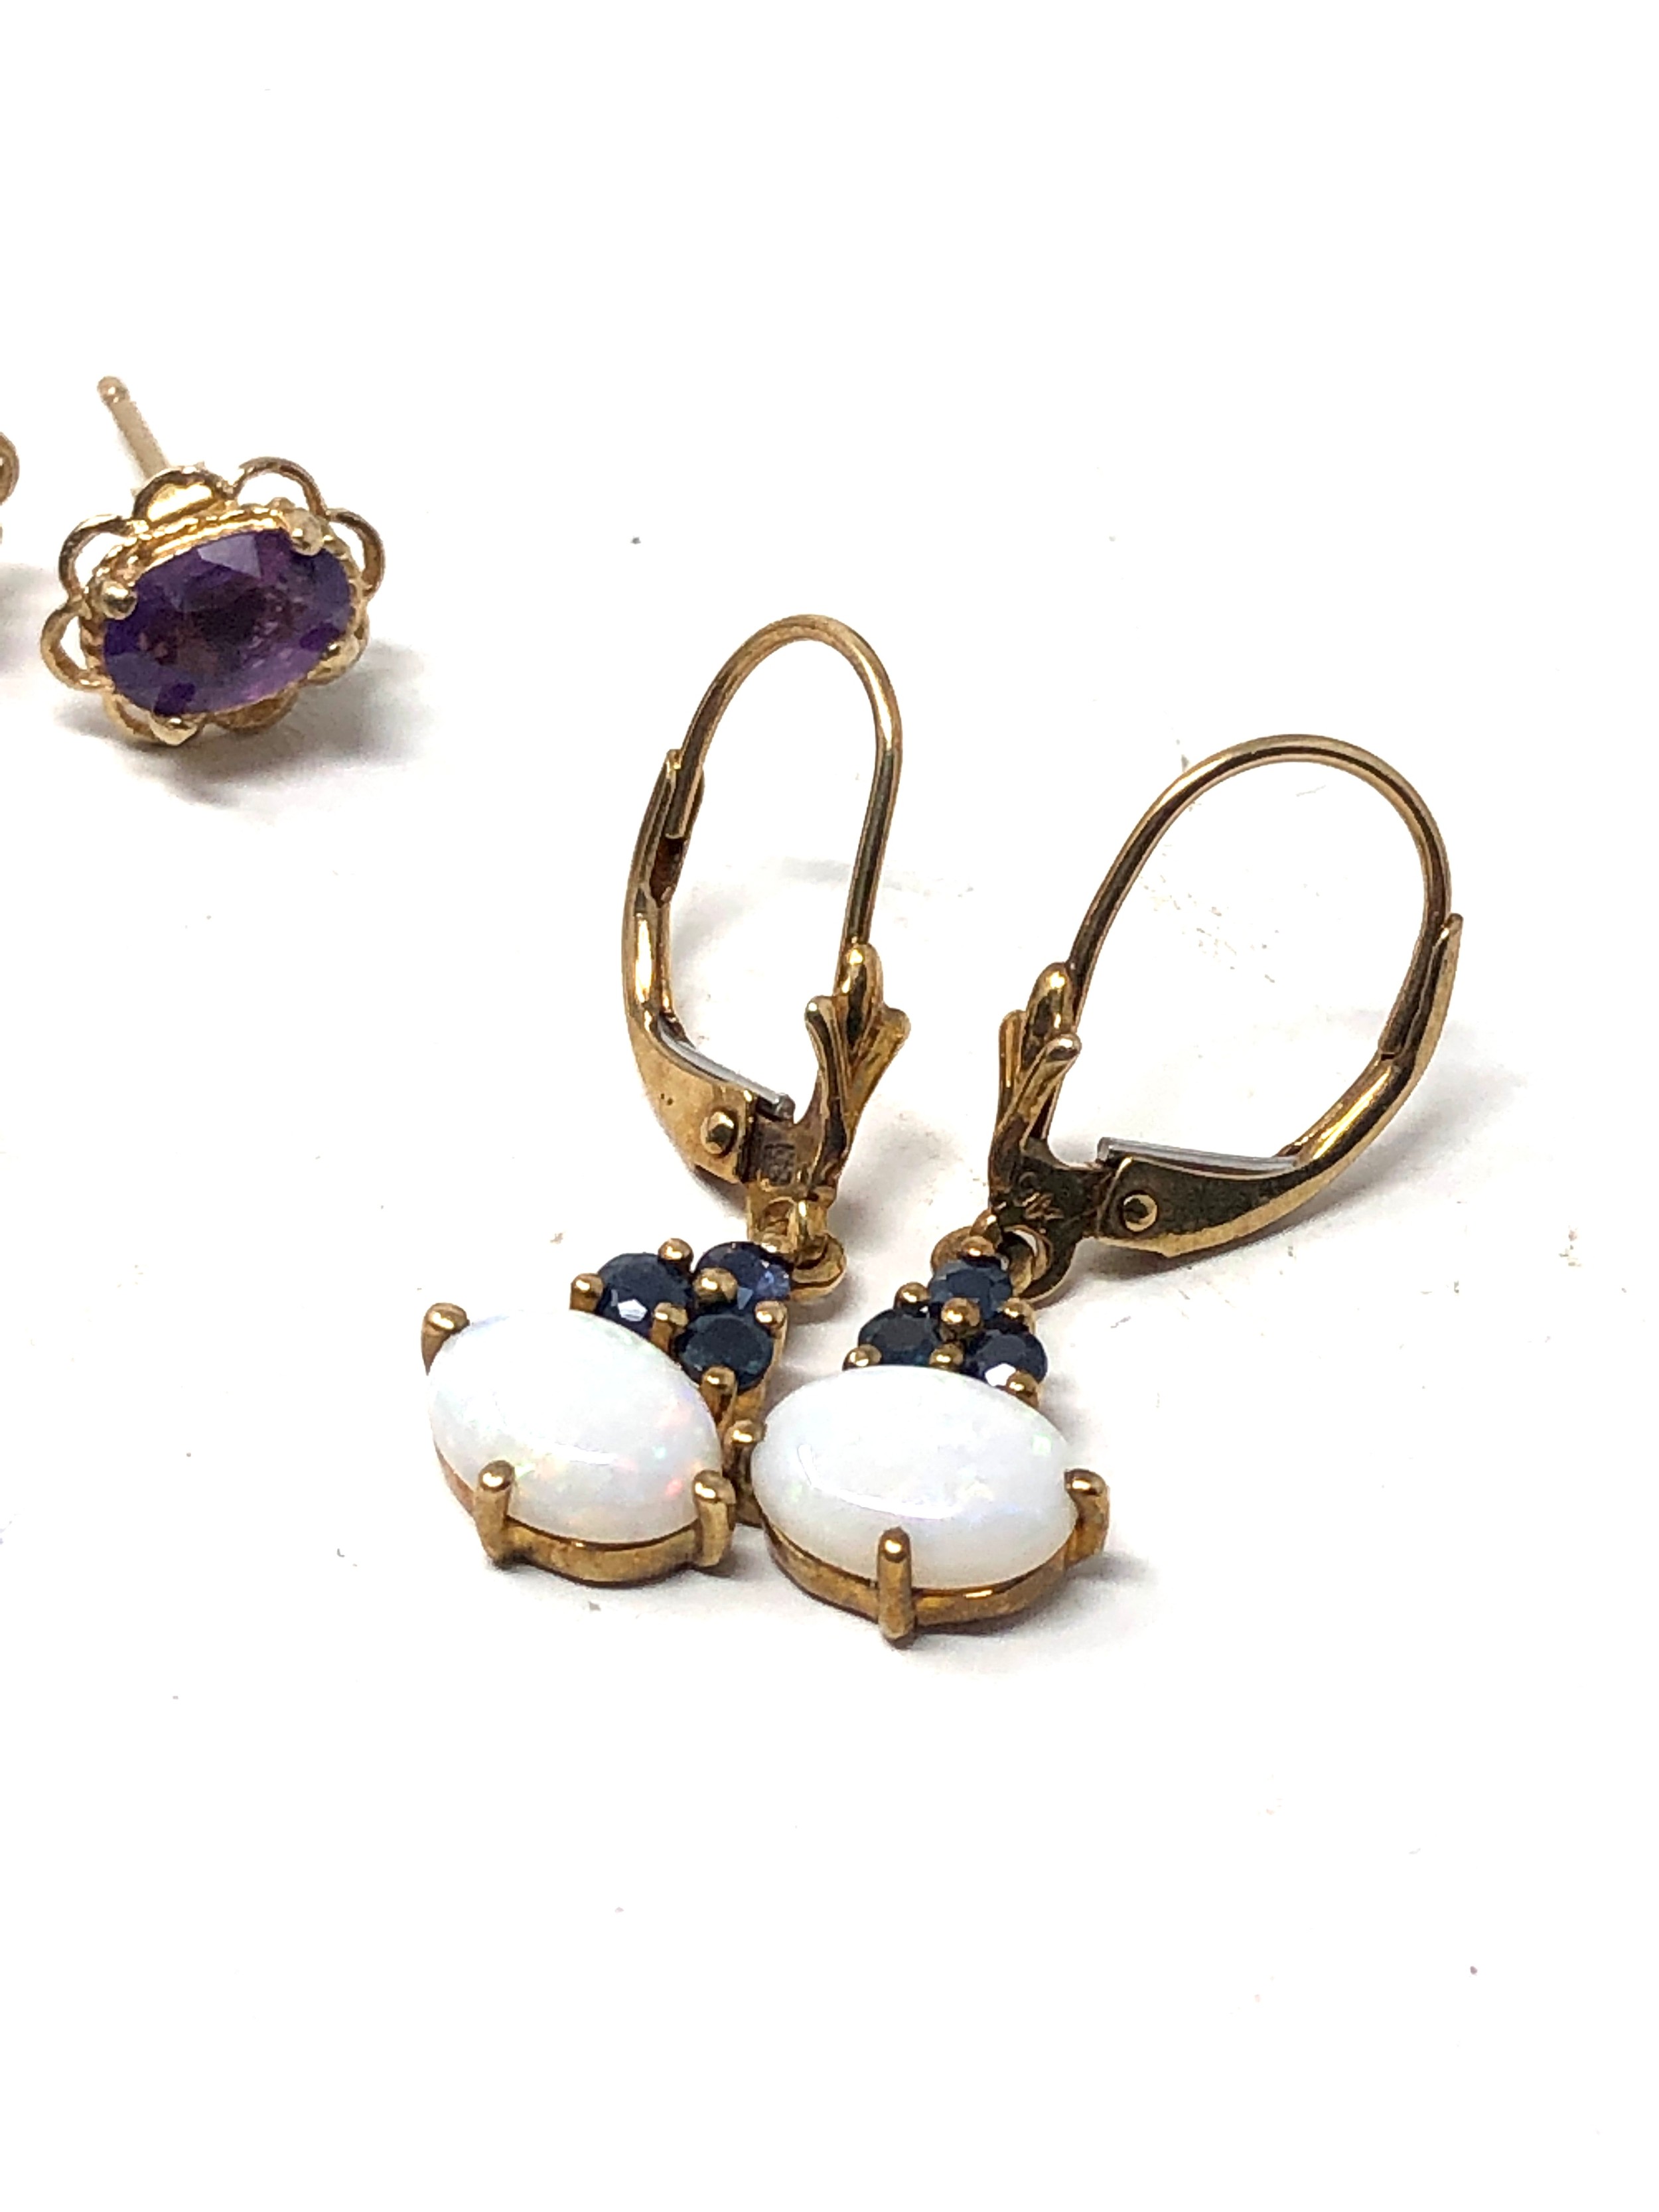 3 x 9ct gold paired gemstone stud earrings inc. amethyst & sapphire - Image 2 of 3